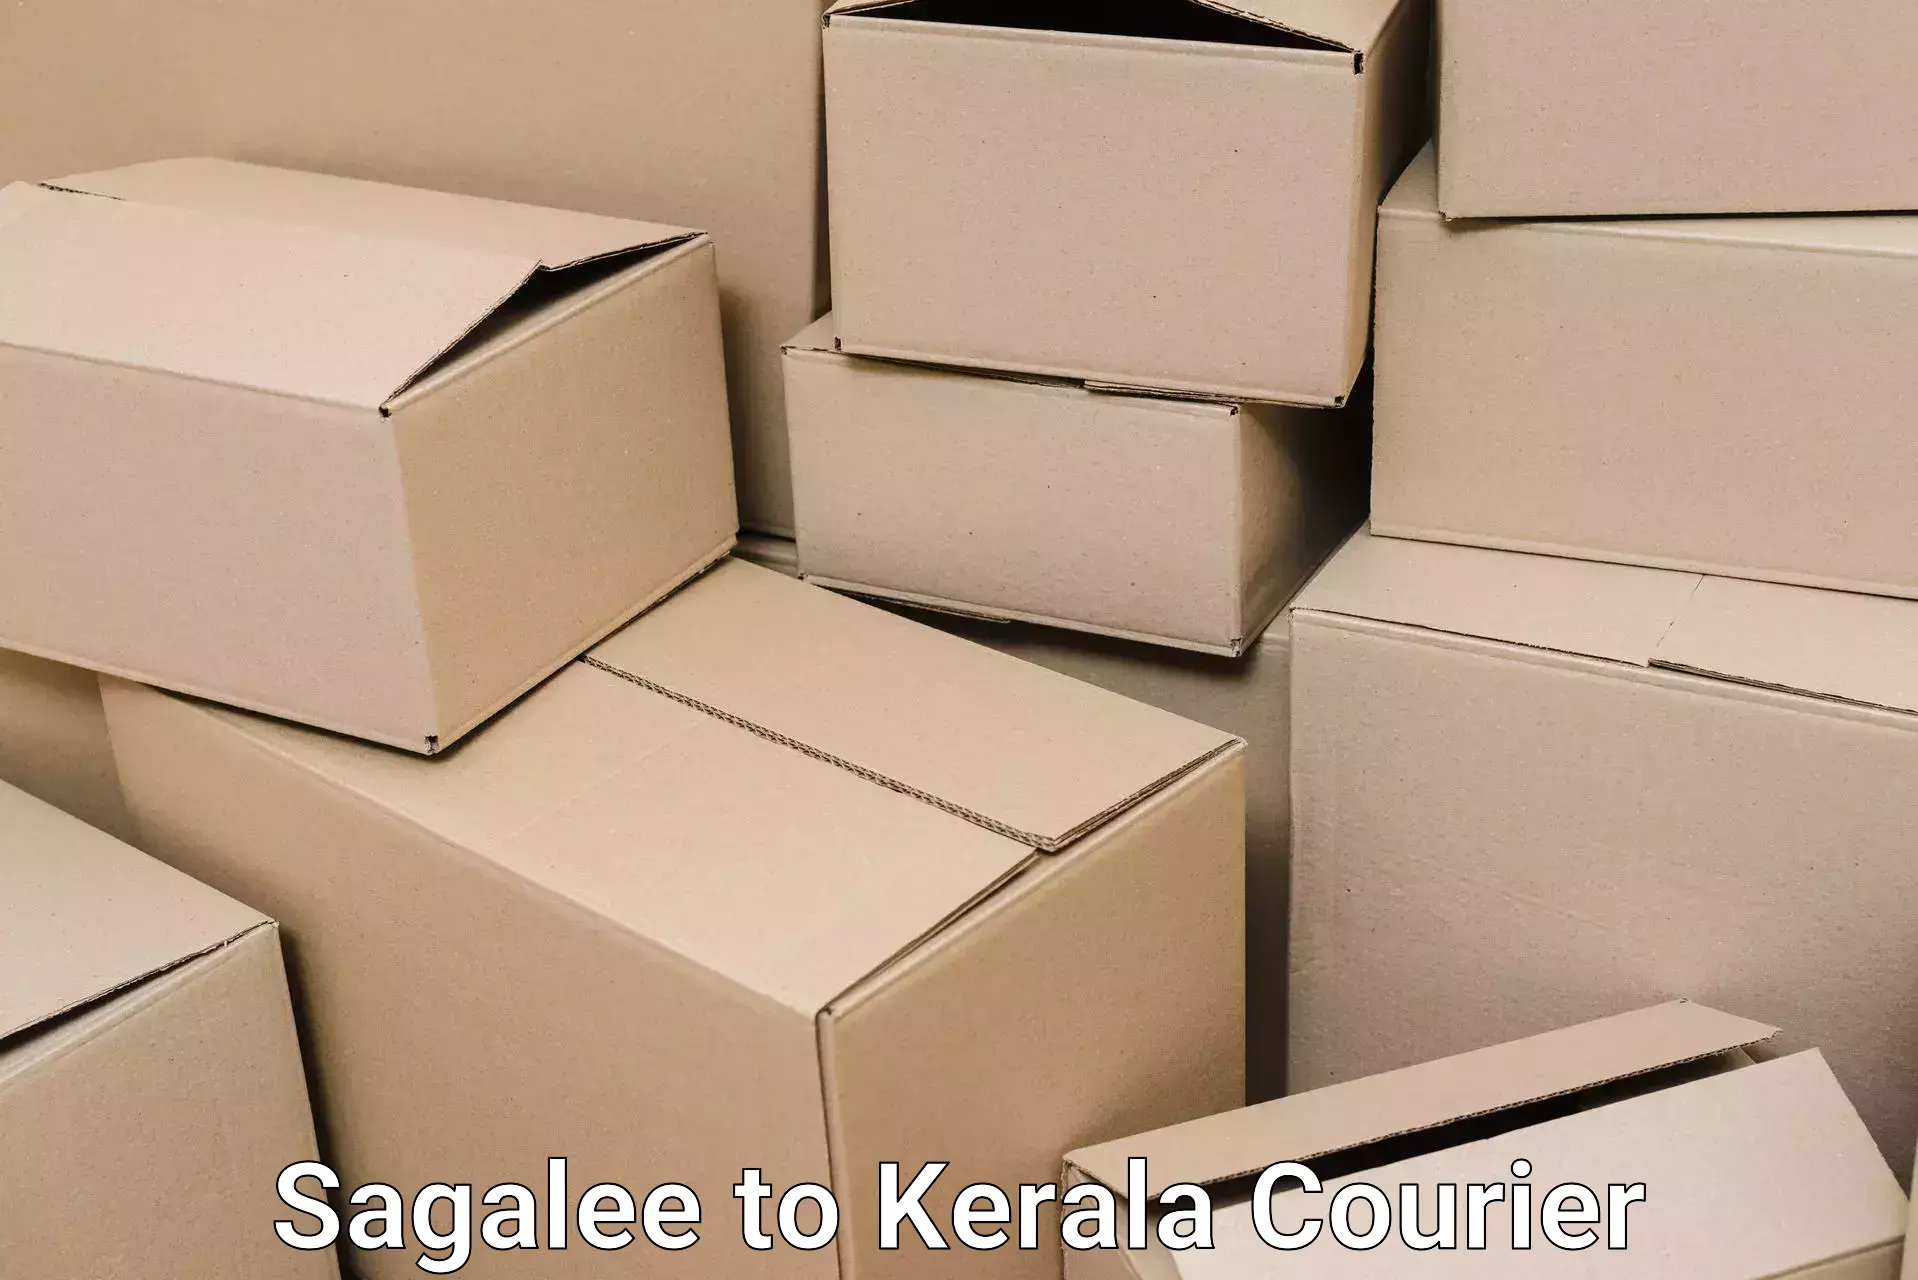 Furniture delivery service Sagalee to Kuchi